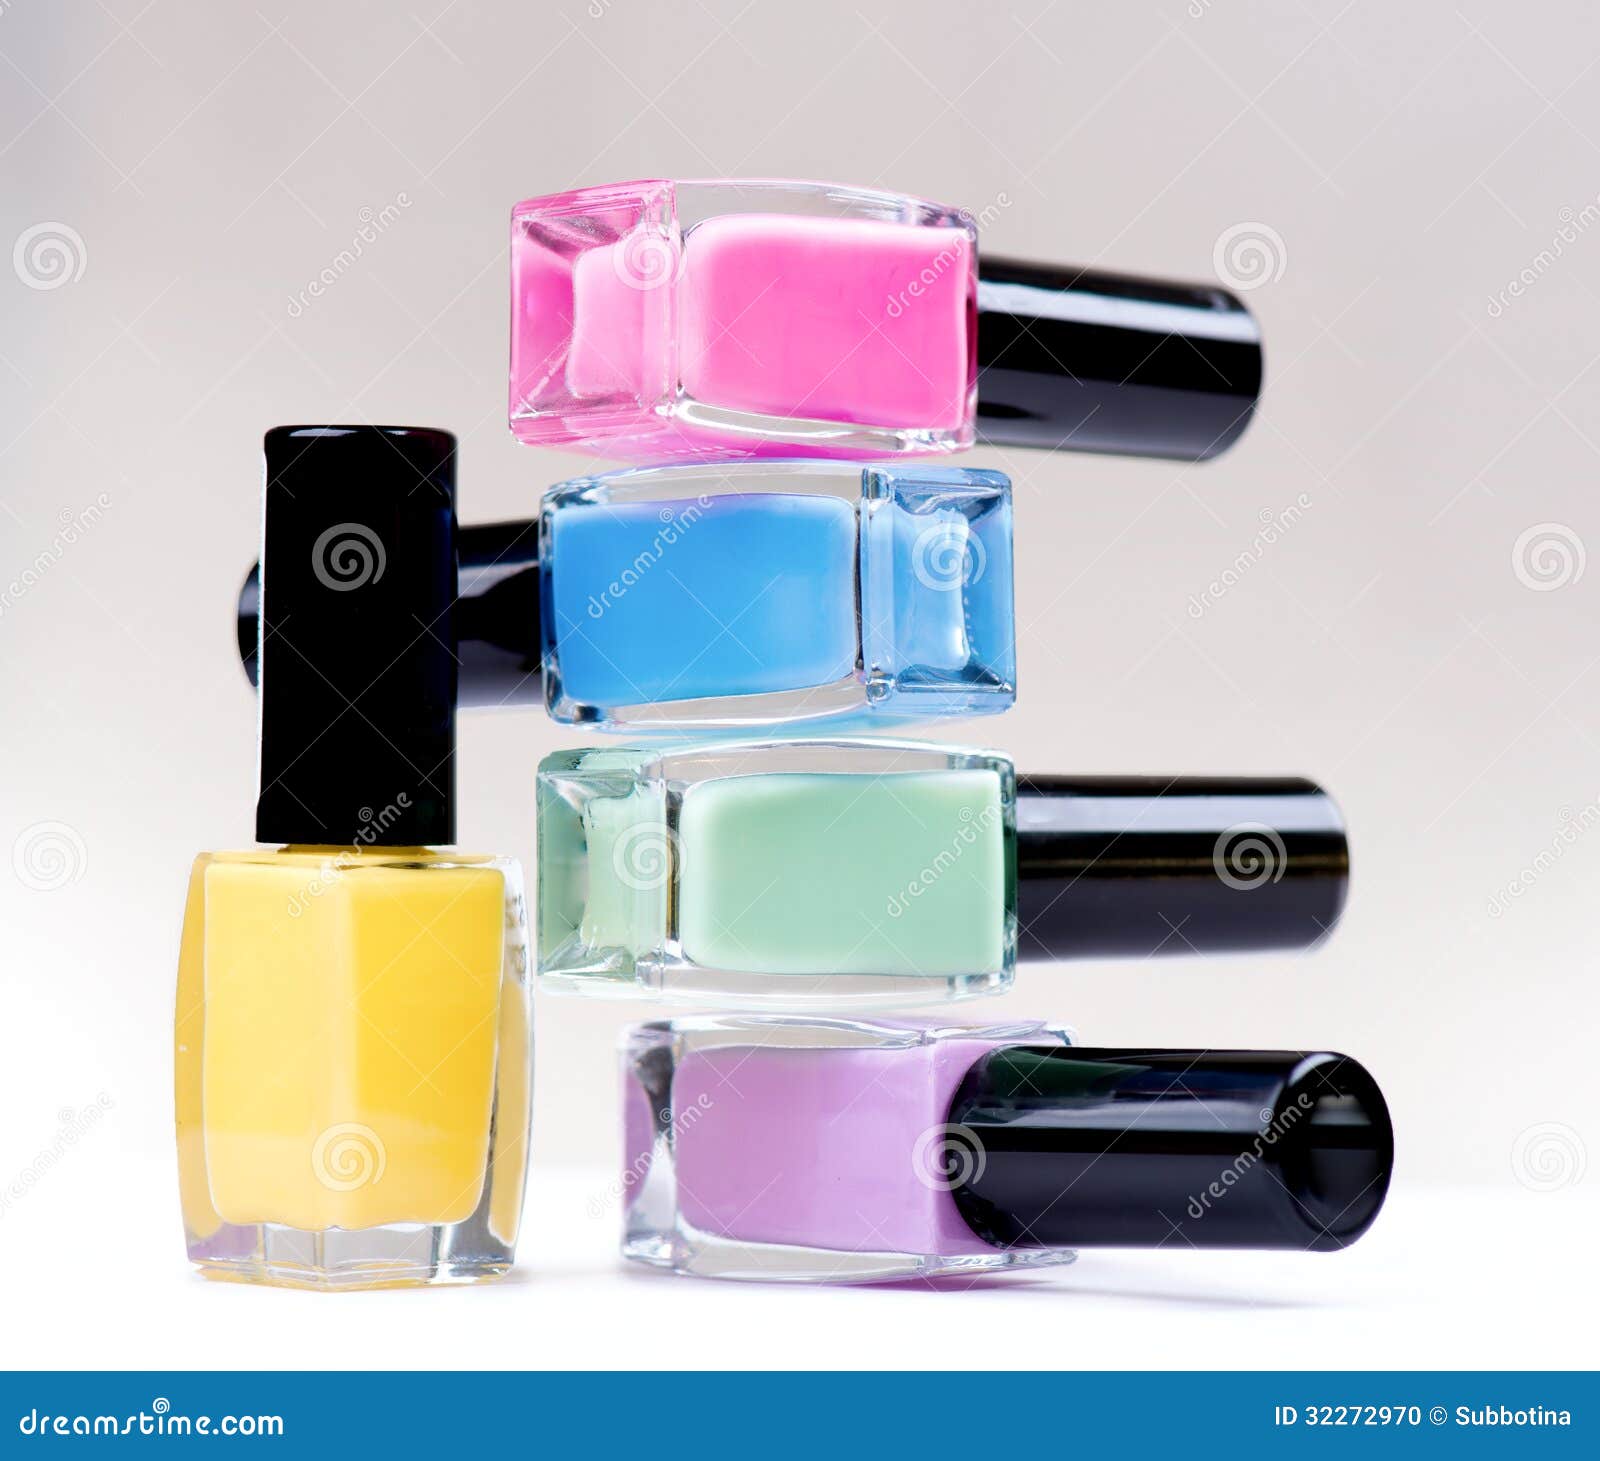 Download 530 Colorful Nail Polish Bottles Bright Yellow Photos Free Royalty Free Stock Photos From Dreamstime Yellowimages Mockups